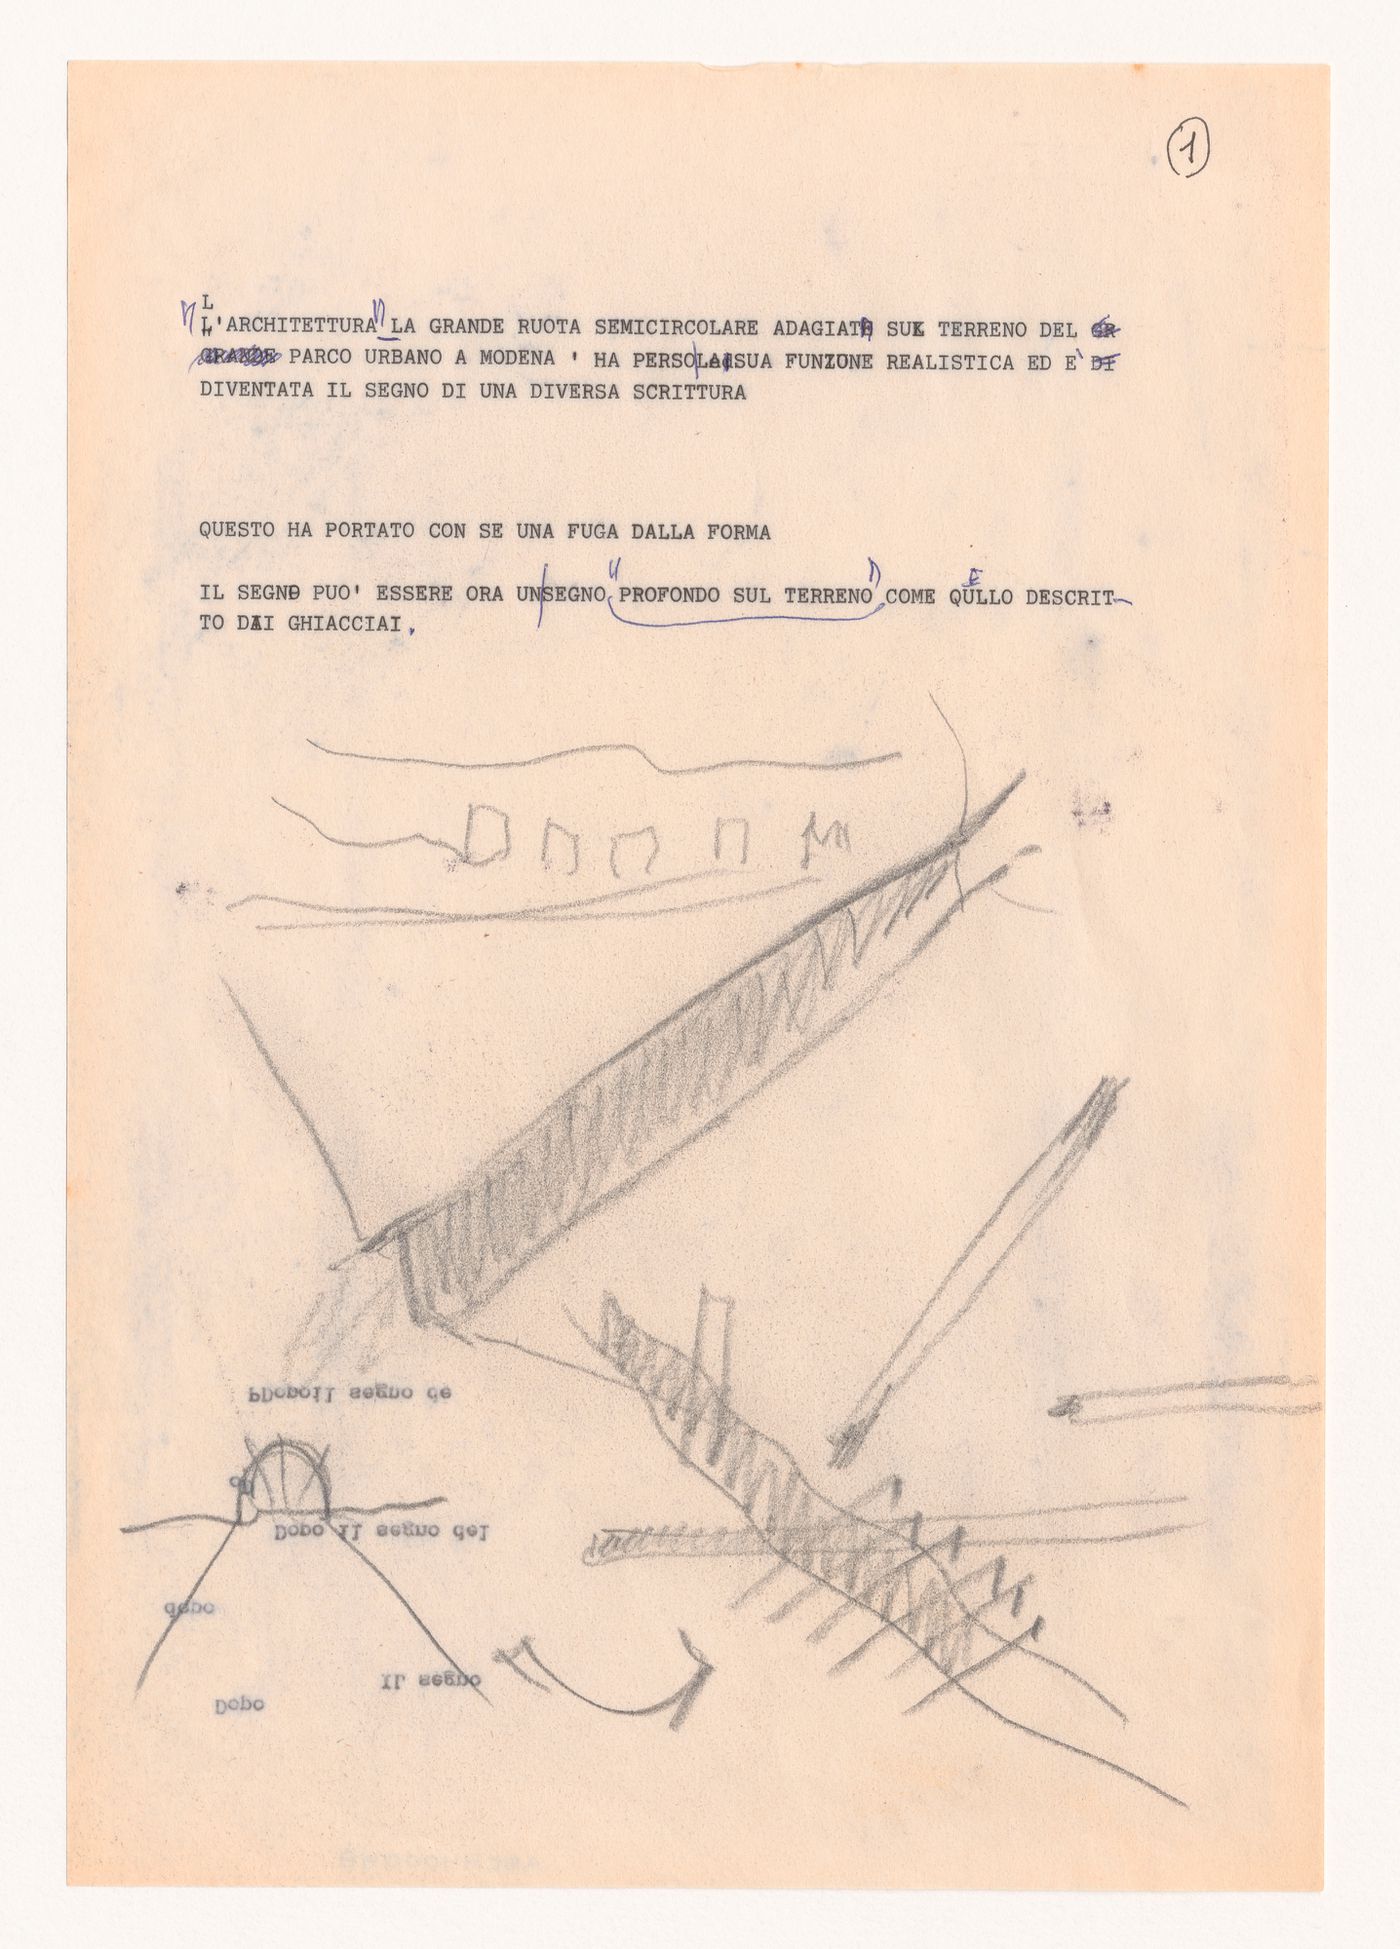 Document with sketches for Breve racconto di Architettura [Brief tale of architecture]